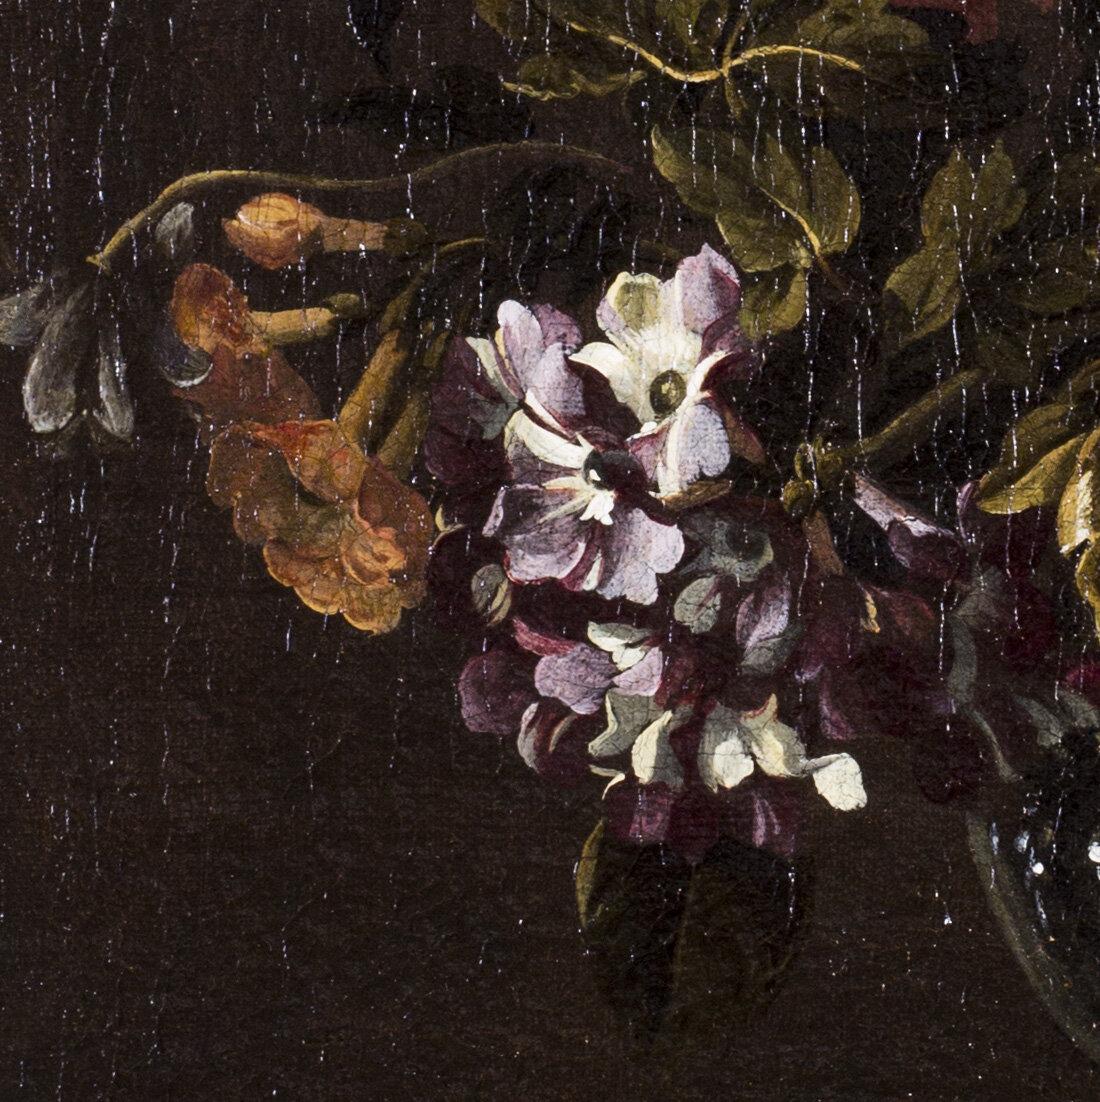 Flemish school, 17th Century, Narcissi and other Summer Blooms in a Glass Vase on a Ledge